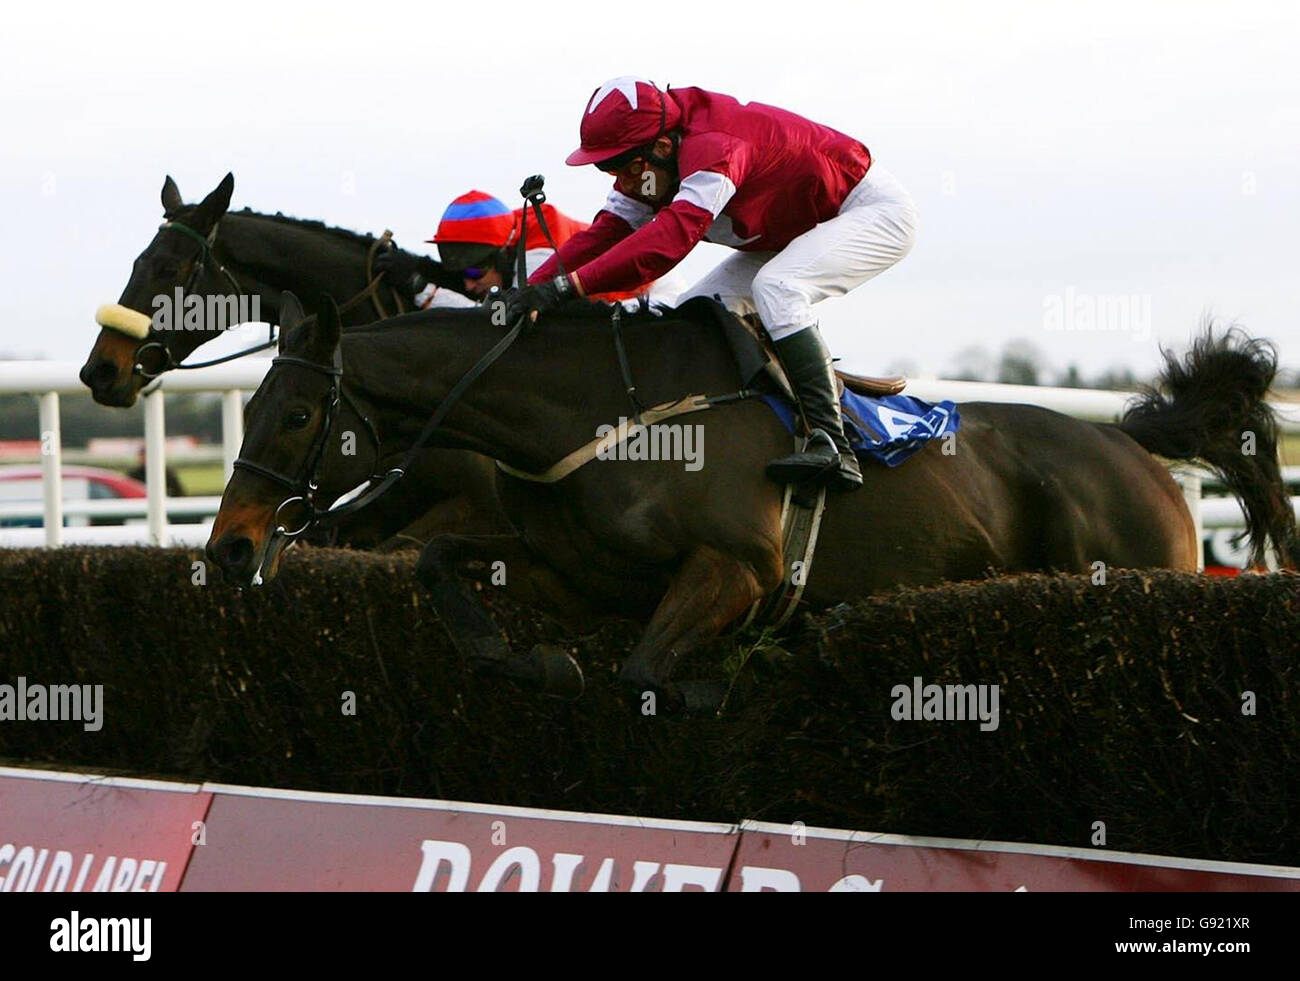 Kill Devil Hill ridden by jockey John Cullen wins ahead of Father Matt ridden by jockey Paul Carberry (behind) in the Pierse Group Drinmore Novice Chase at Fairyhouse racecourse, Sunday December 4, 2005. PRESS ASSOCIATION Photo. Photo credit should read: Julien Behal/PA. Stock Photo